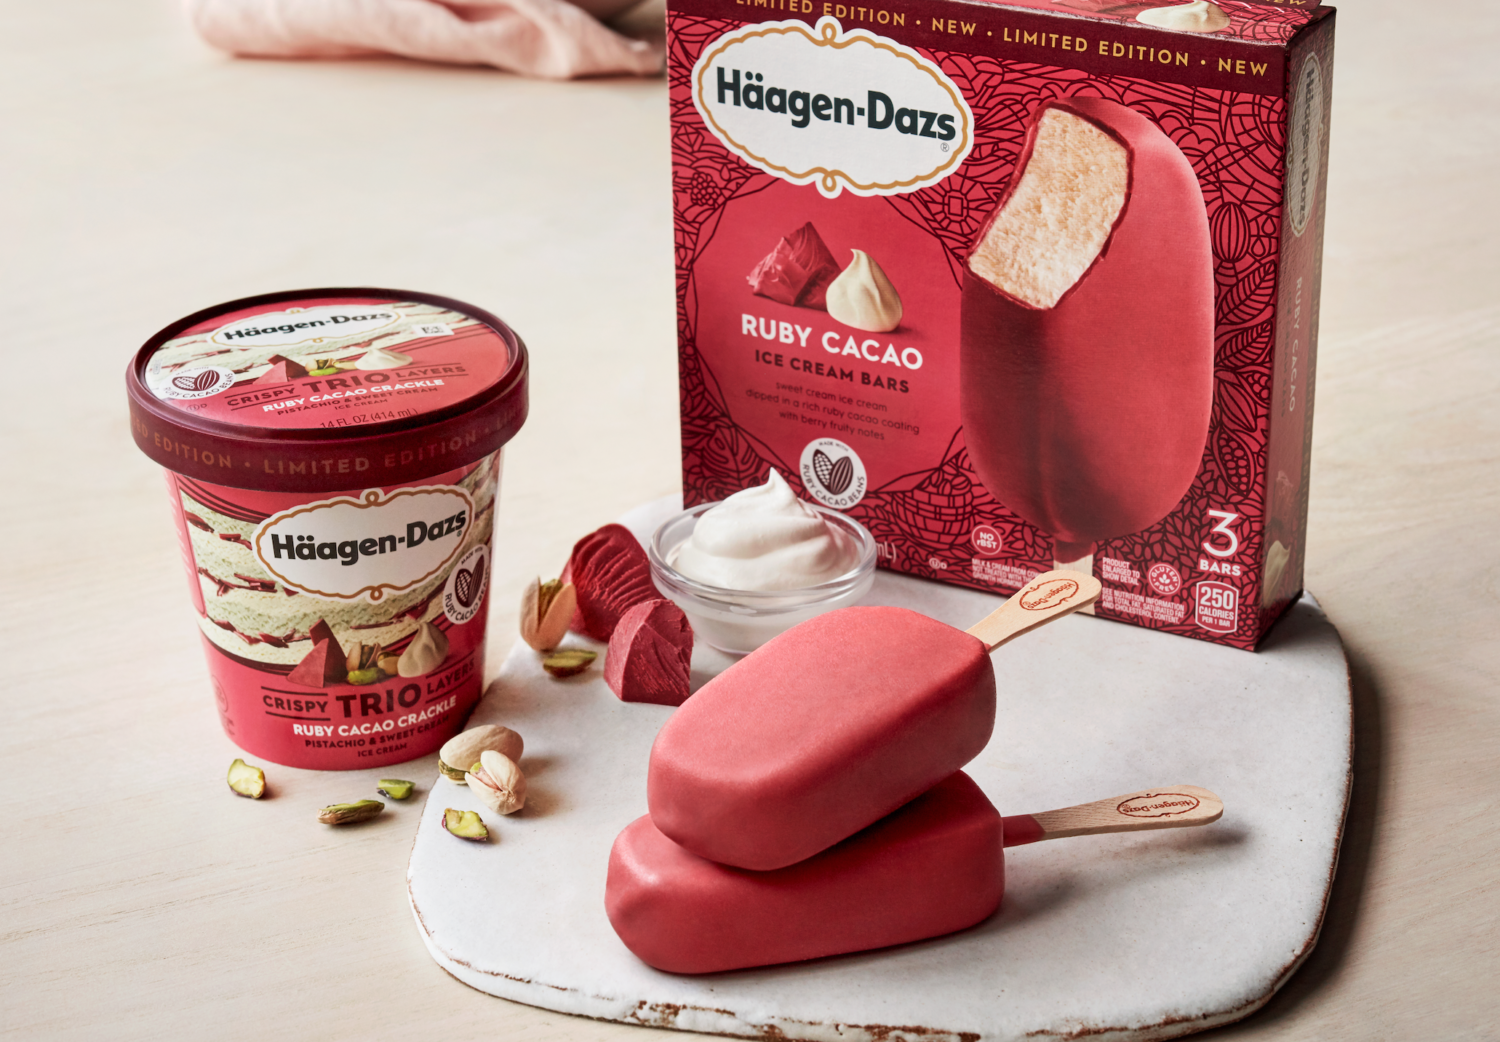 This New Haagen Dazs Ice Cream With Ruby Cacao Chocolate Is